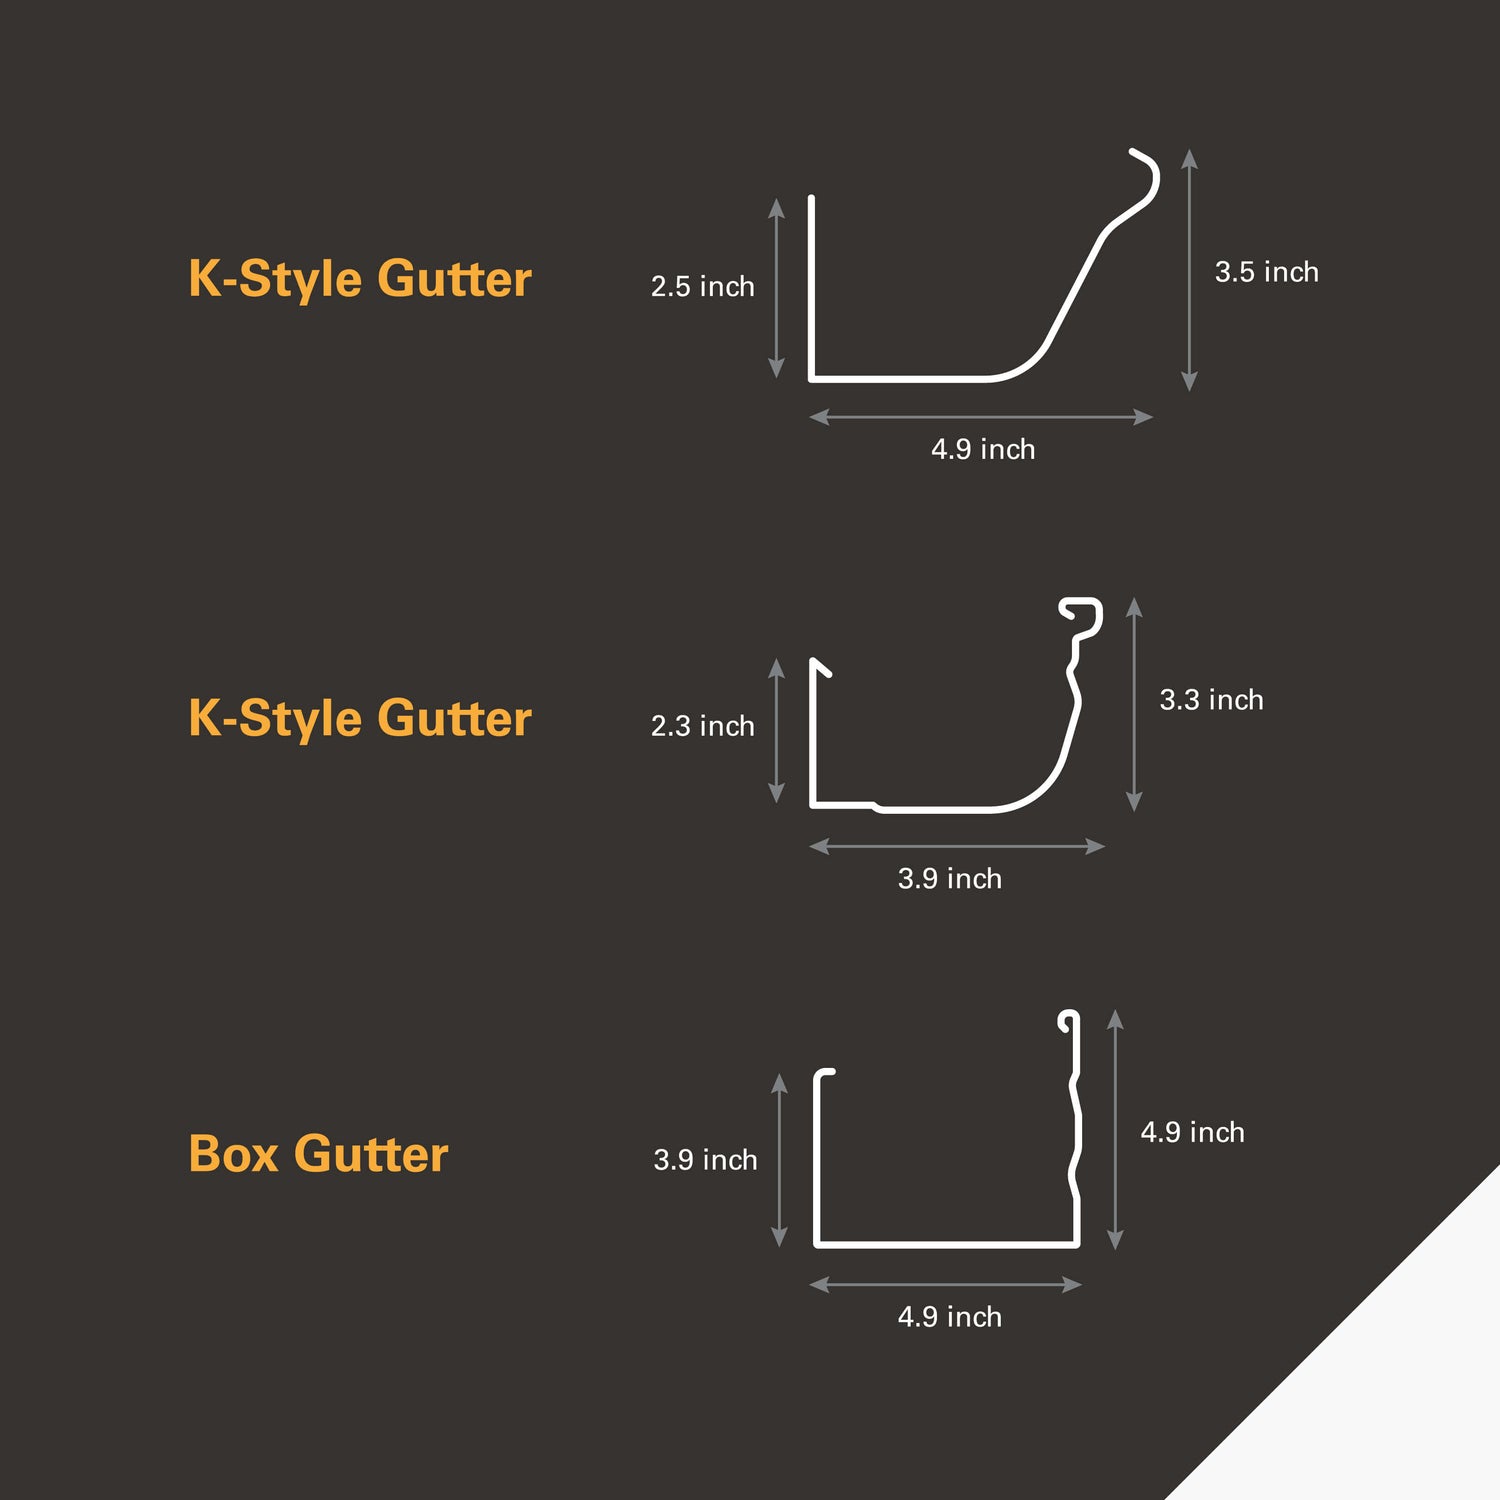 Diagram showing 3 types of gutters from a side view: K-style gutter with 2 sizes and Box Gutter